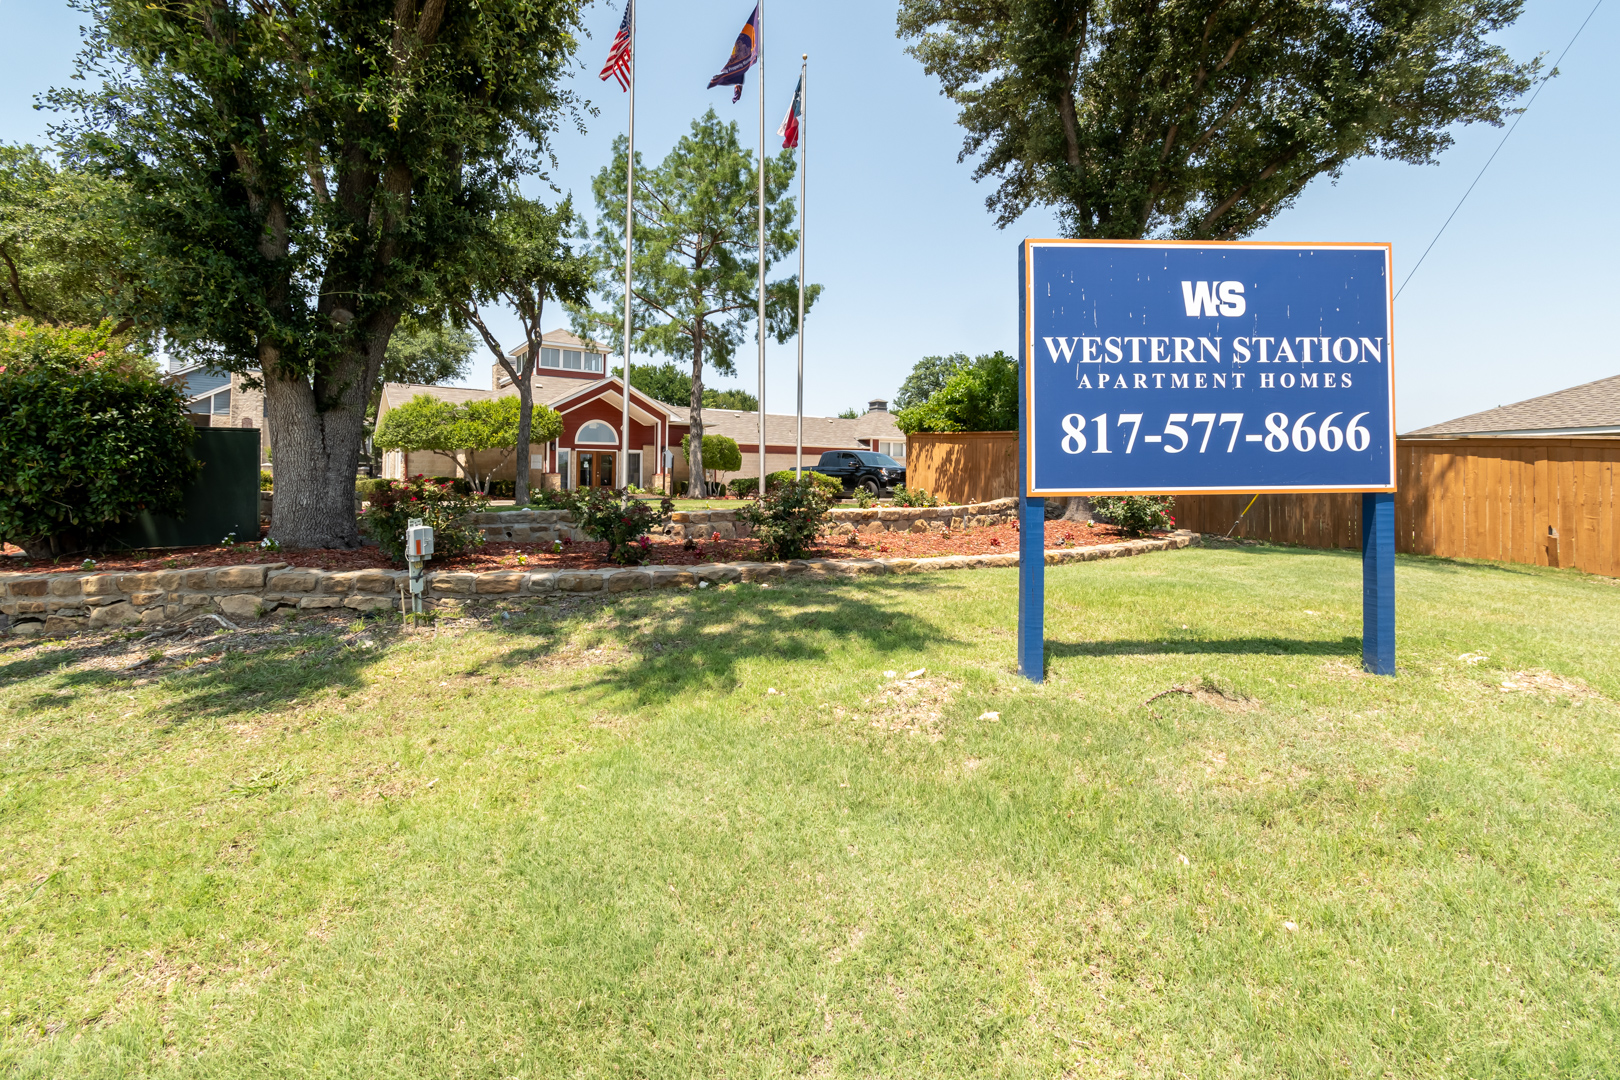 Western Station Apartment Homes